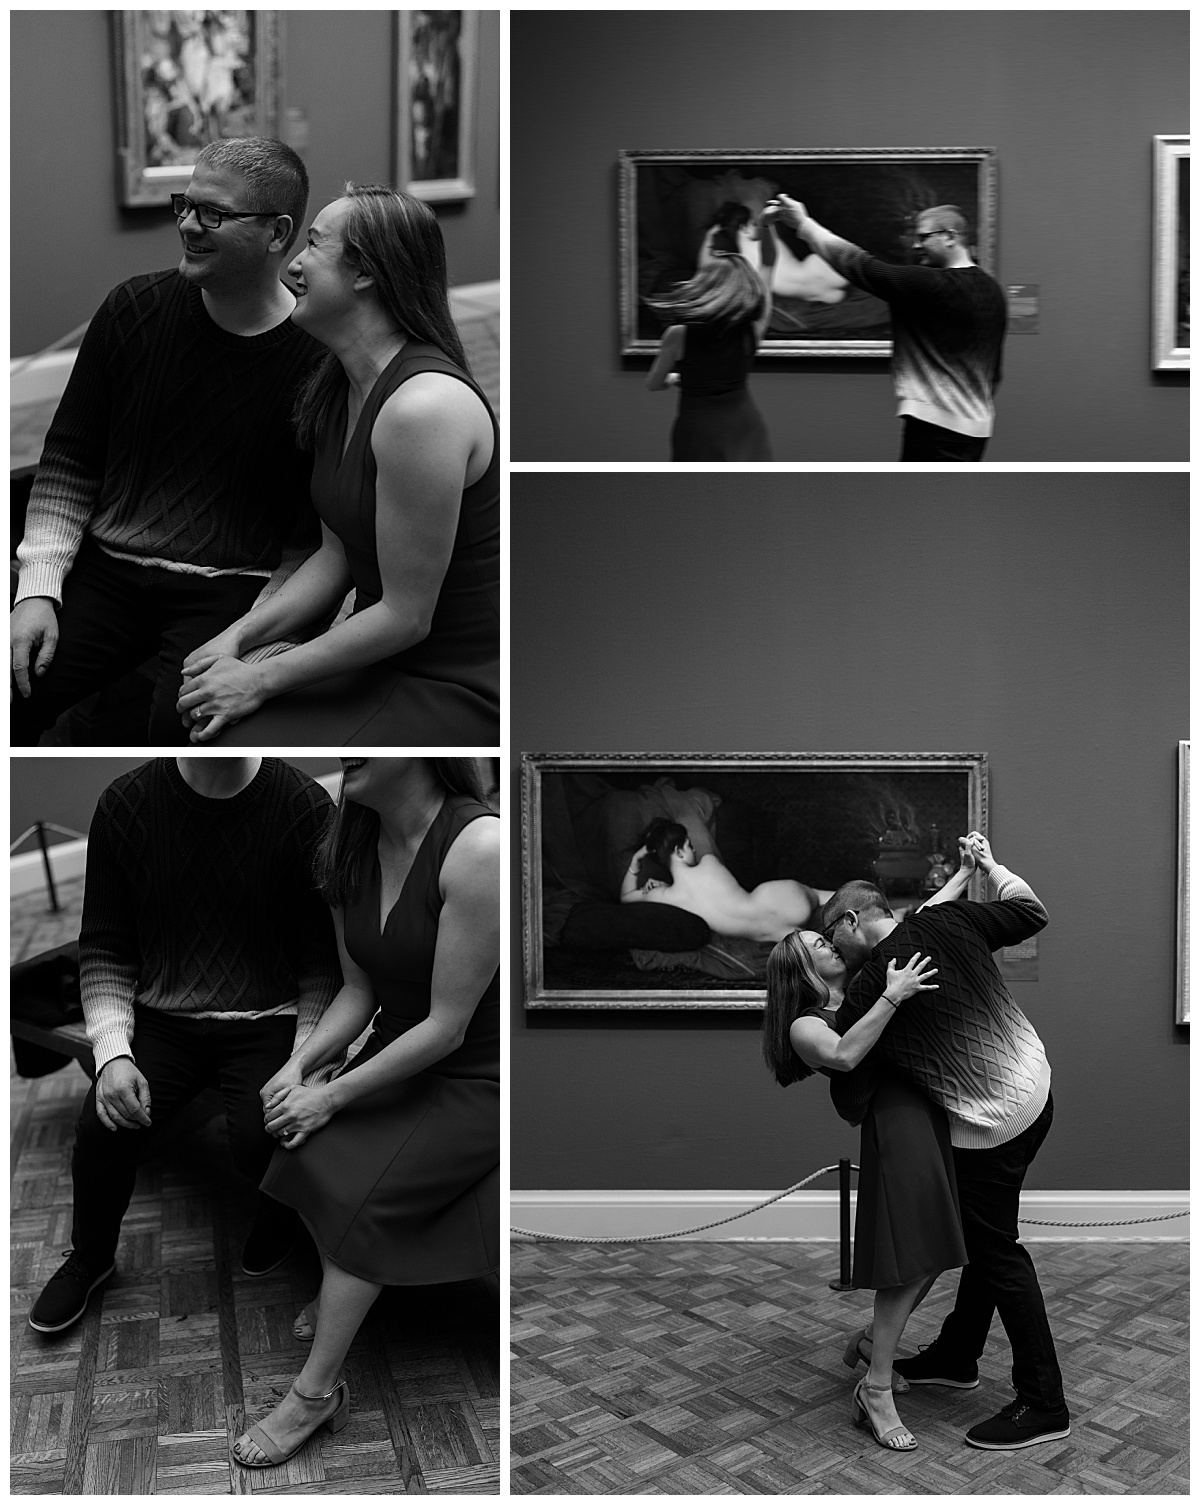 man spins woman in front of painting at Art Institute of Chicago